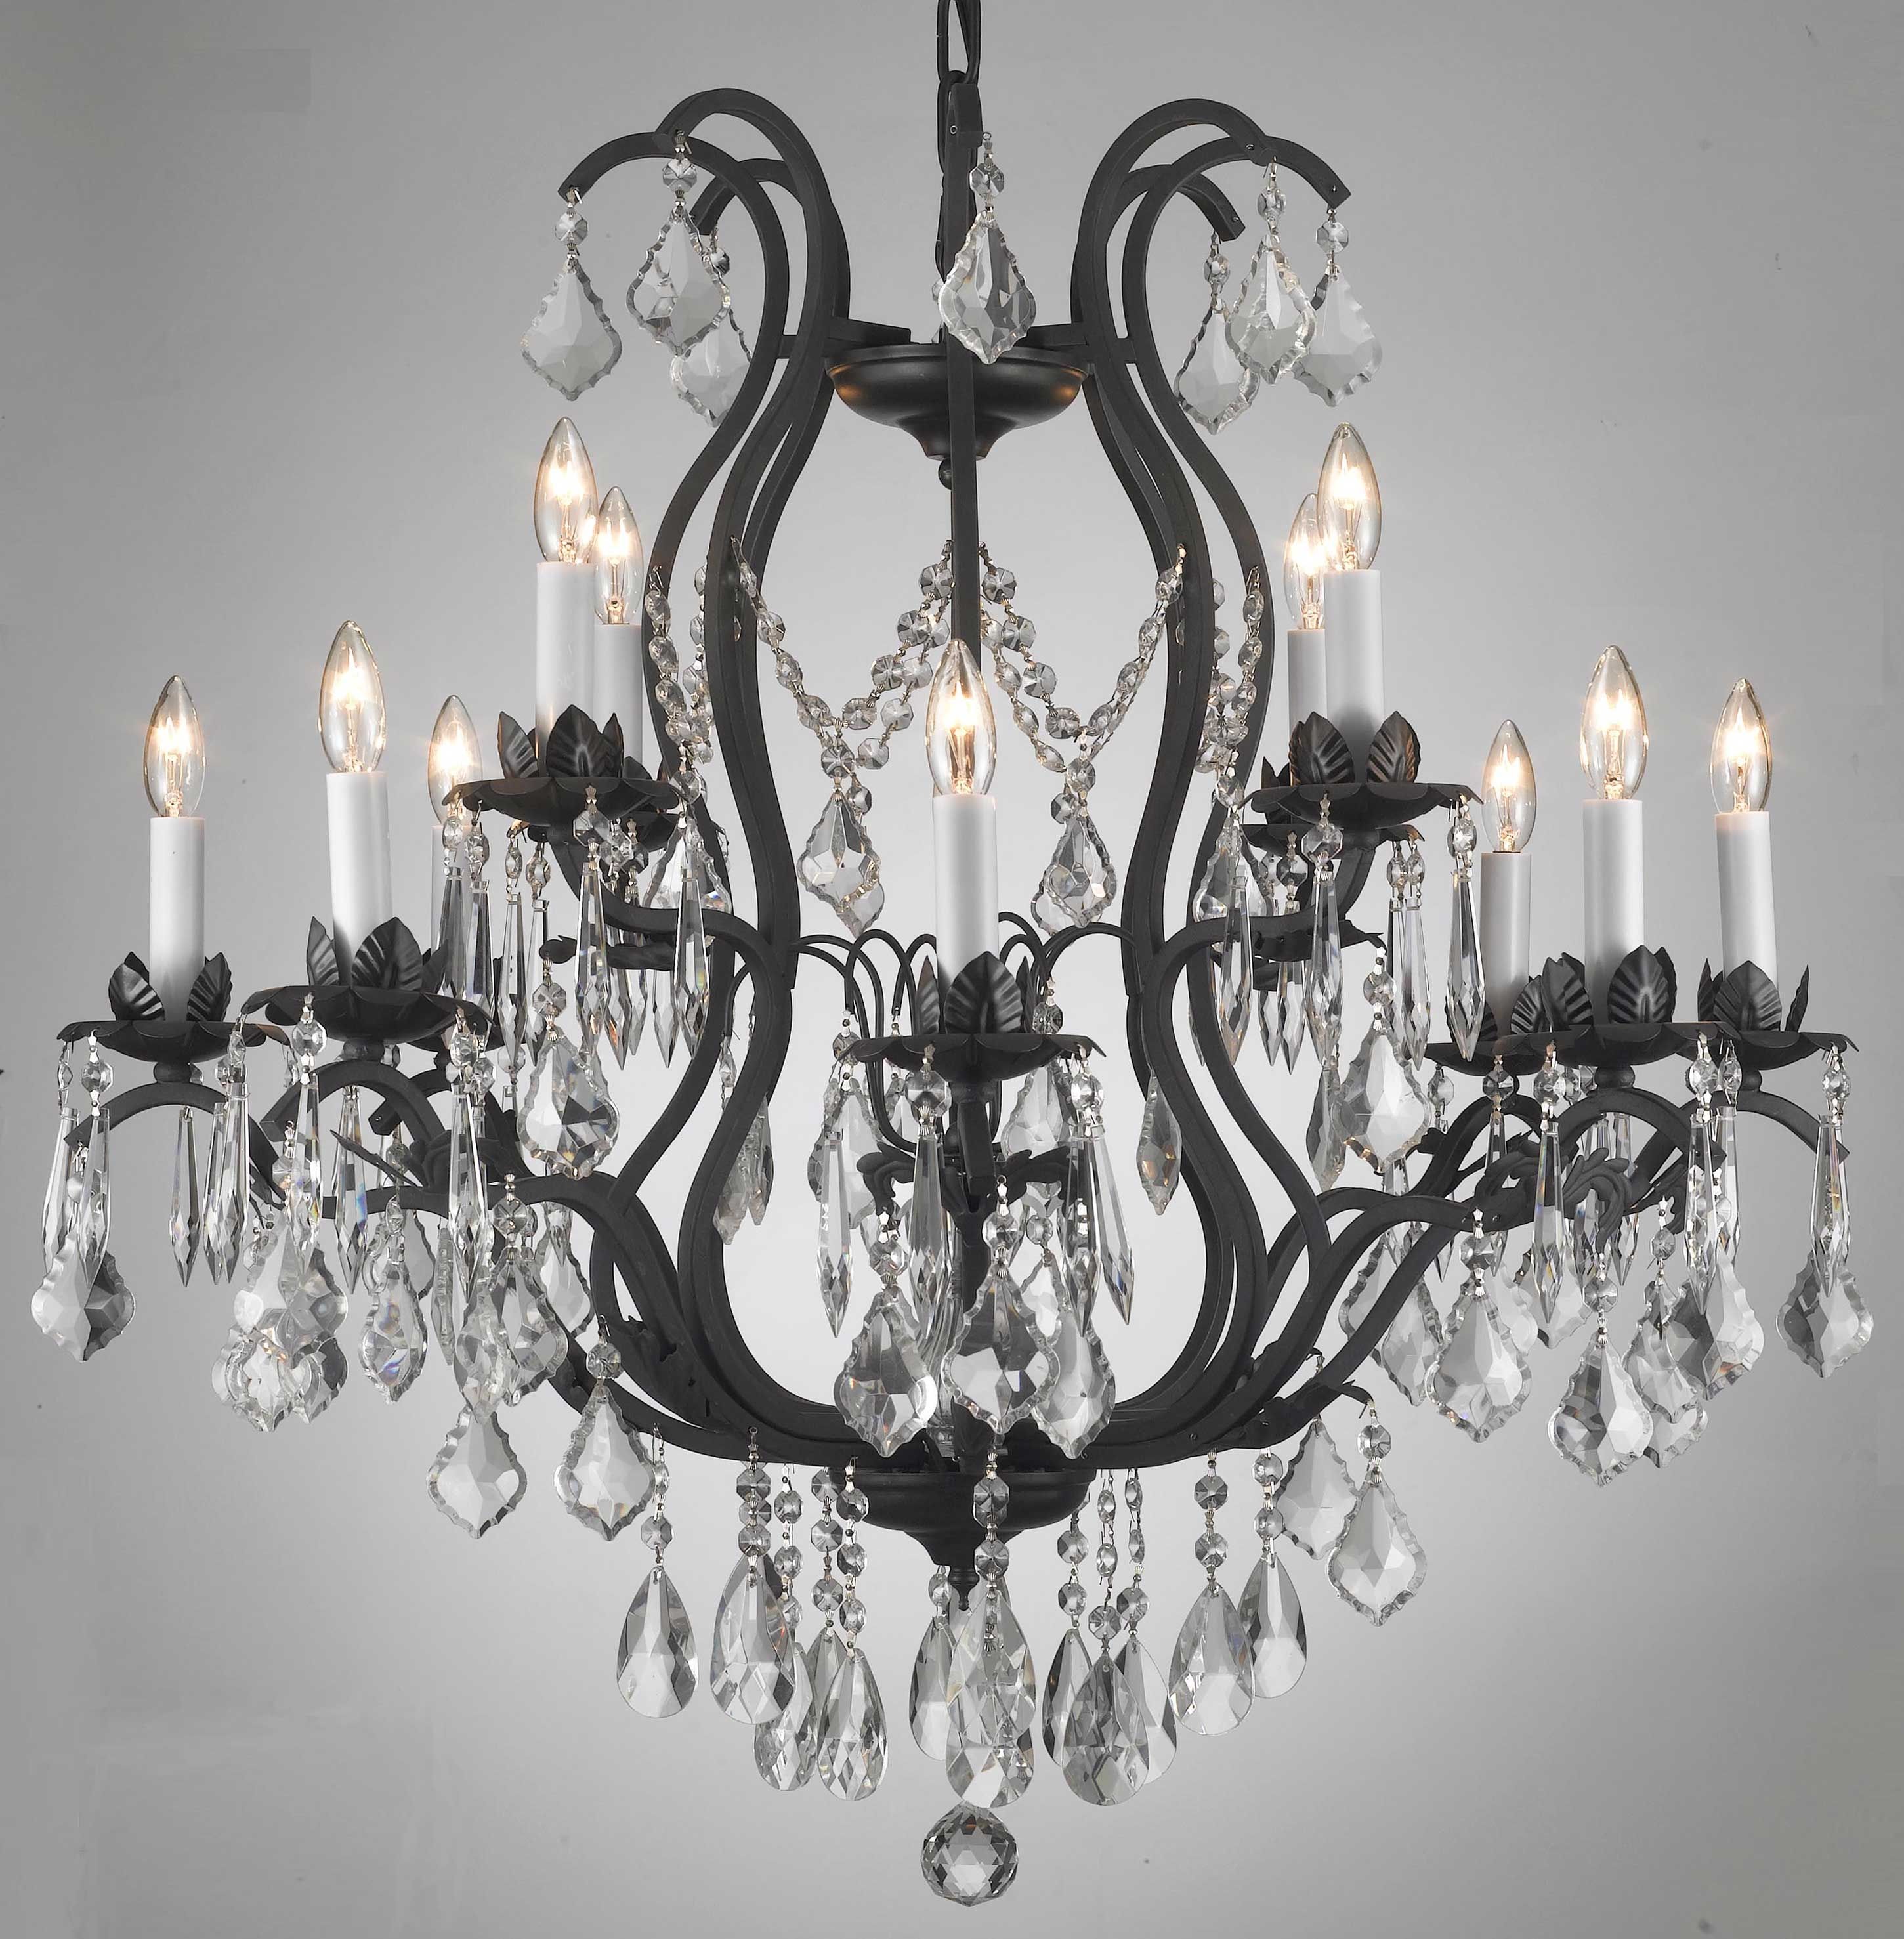 G93 Cs18643 Gallery Flush French Empire Crystal Flush Basket Throughout Grey Crystal Chandelier (View 7 of 12)